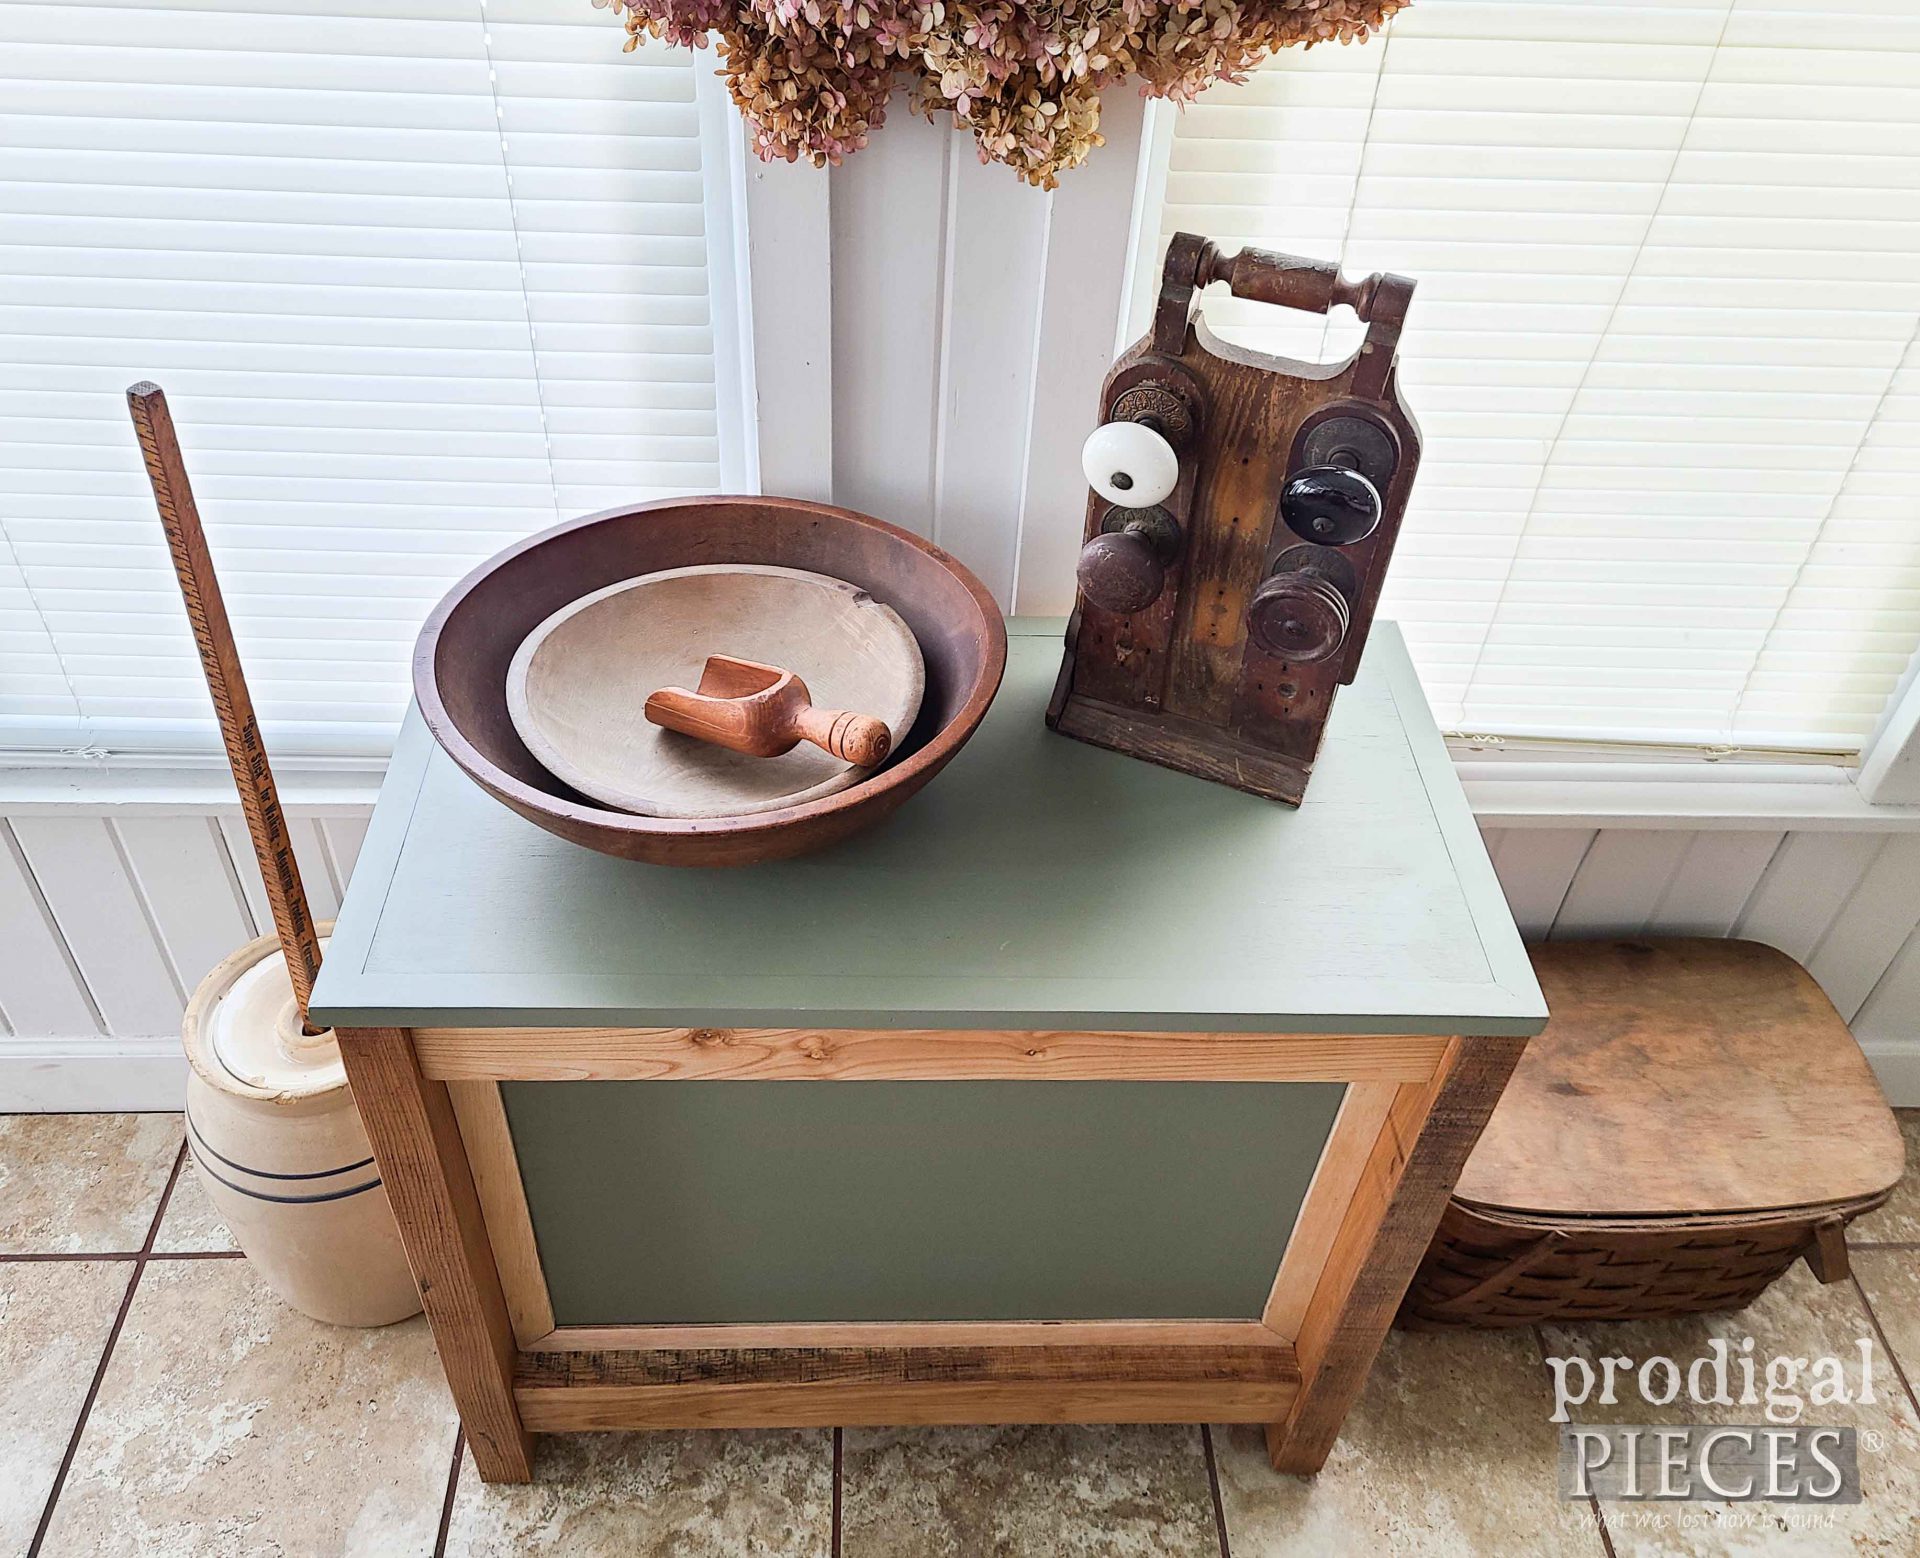 Top View of Rustic Farmhouse Storage Chest from Reclaimed Pallet Wood by Larissa of Prodigal Pieces | prodigalpieces.com #prodigalpieces #diy #storage #furniture #farmhouse